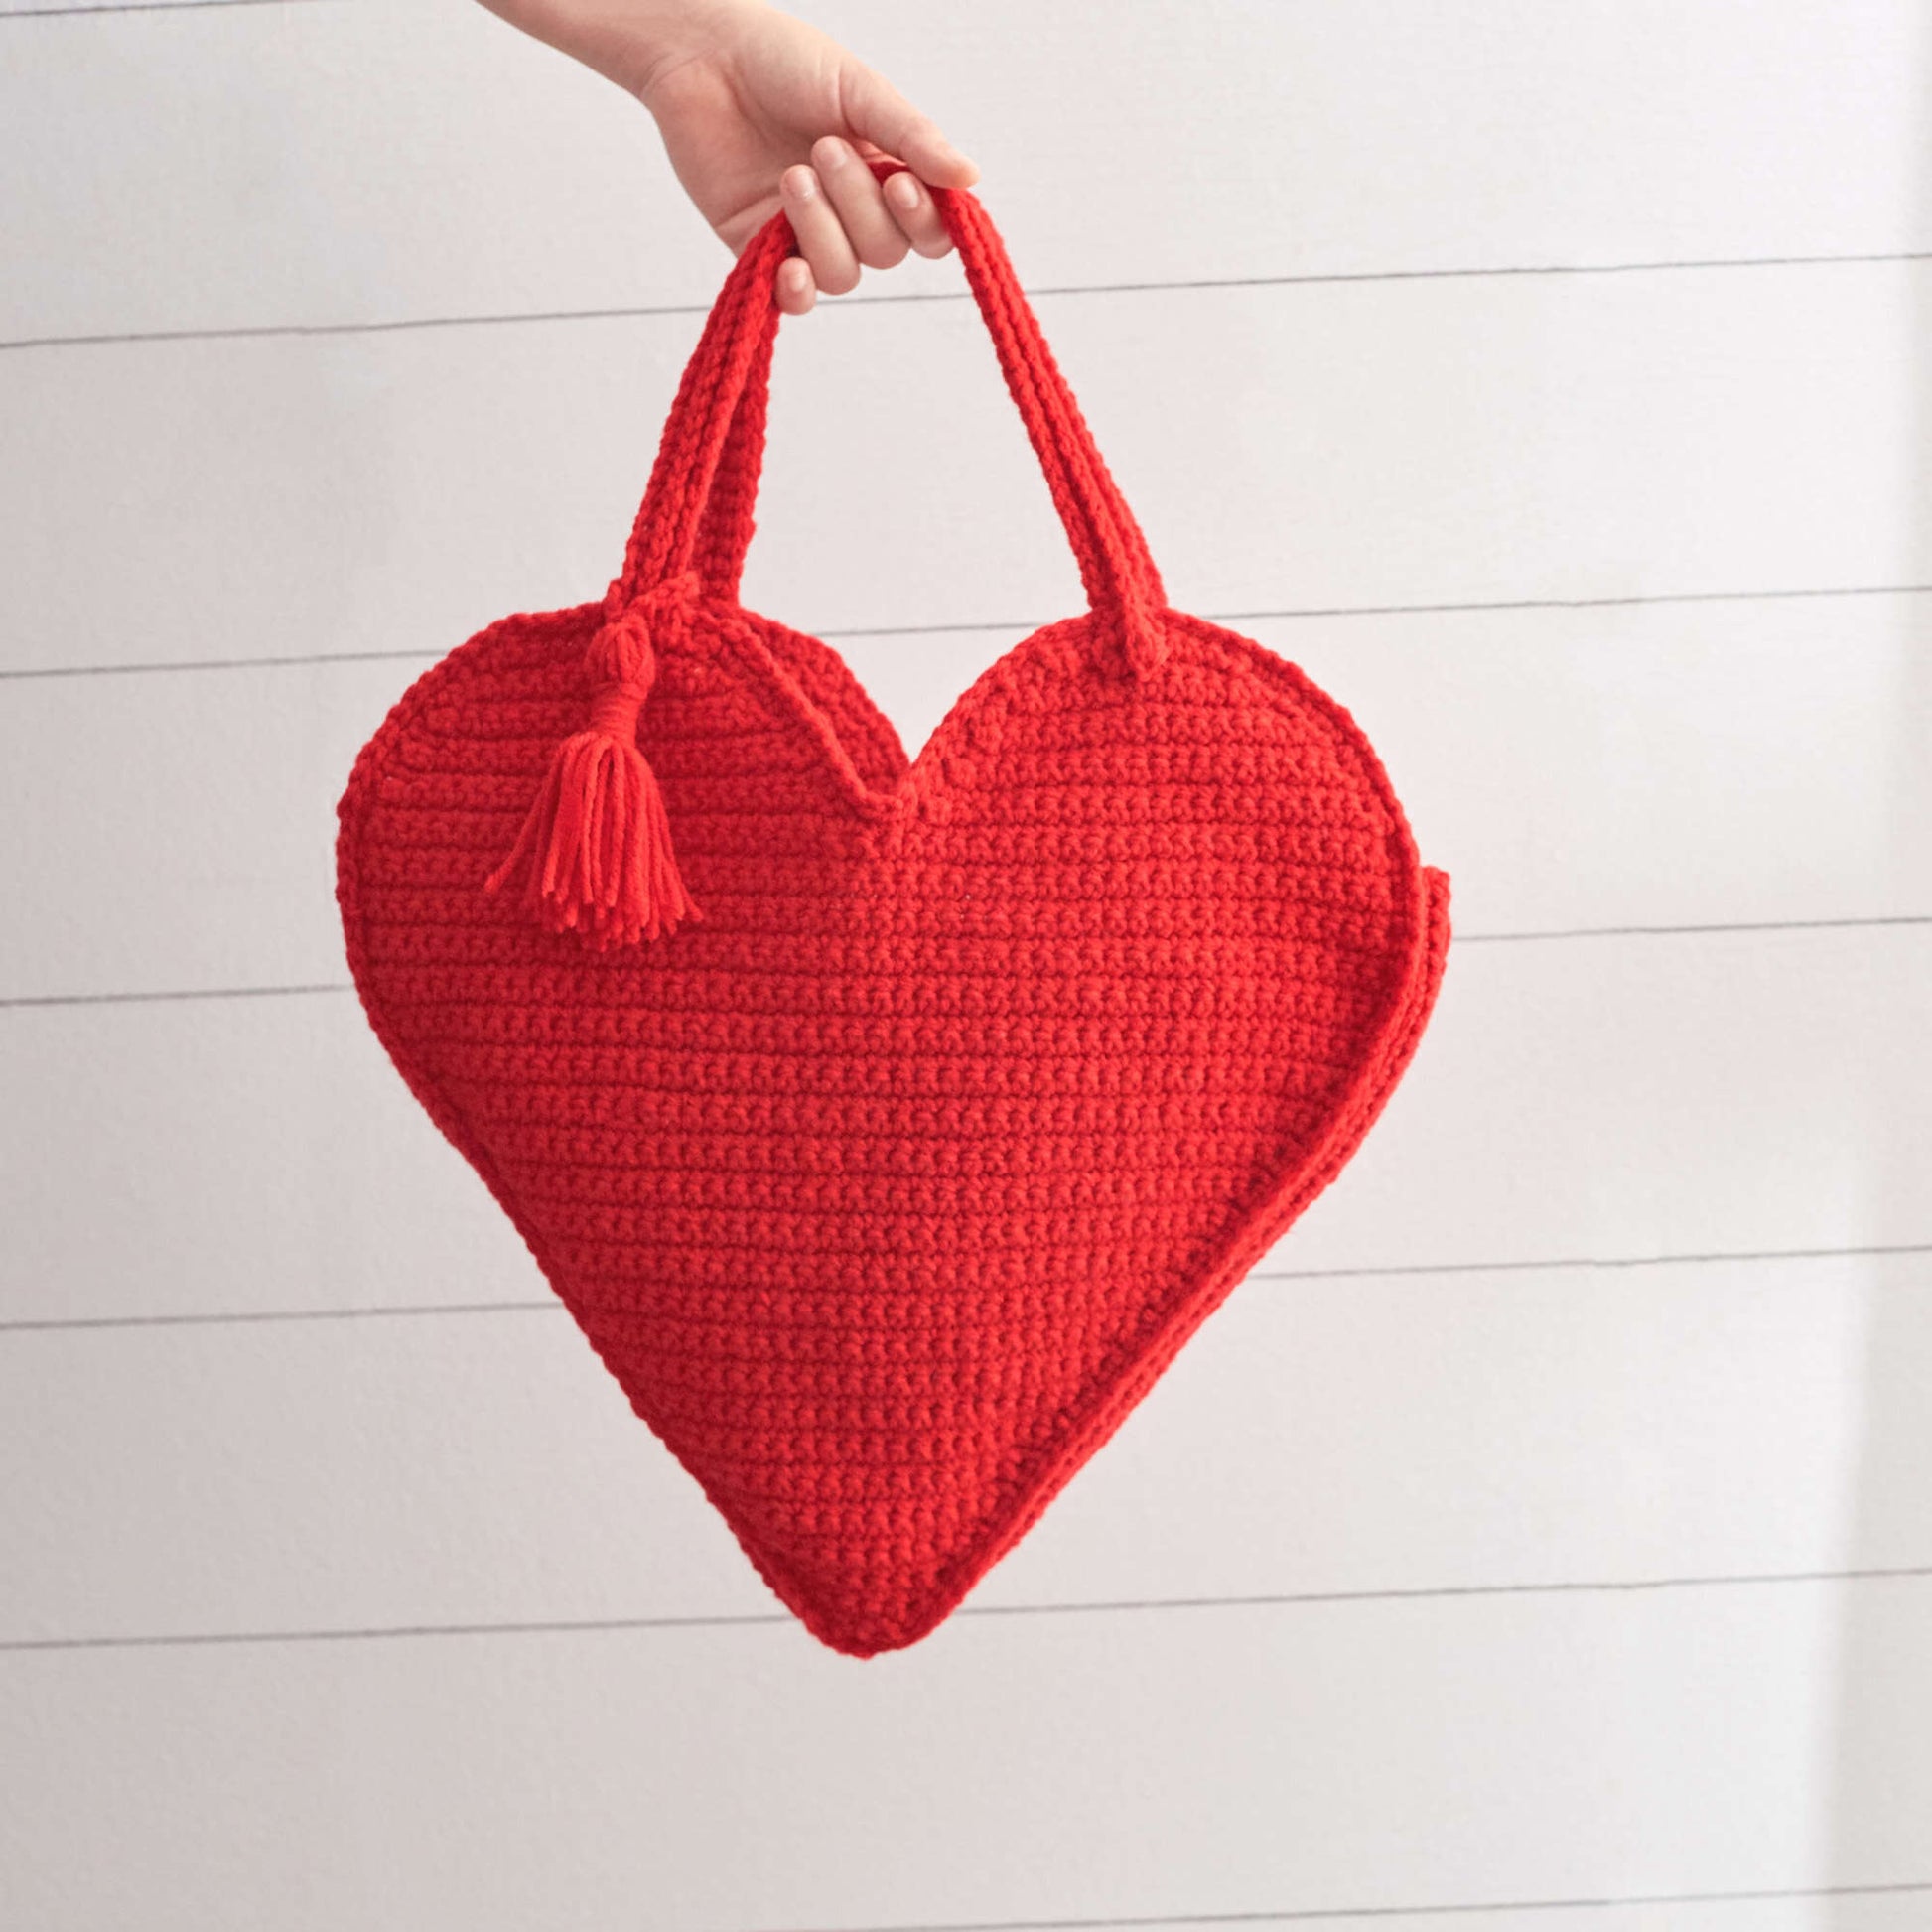 Red Heart Heart Tote Bag Pattern | Yarnspirations